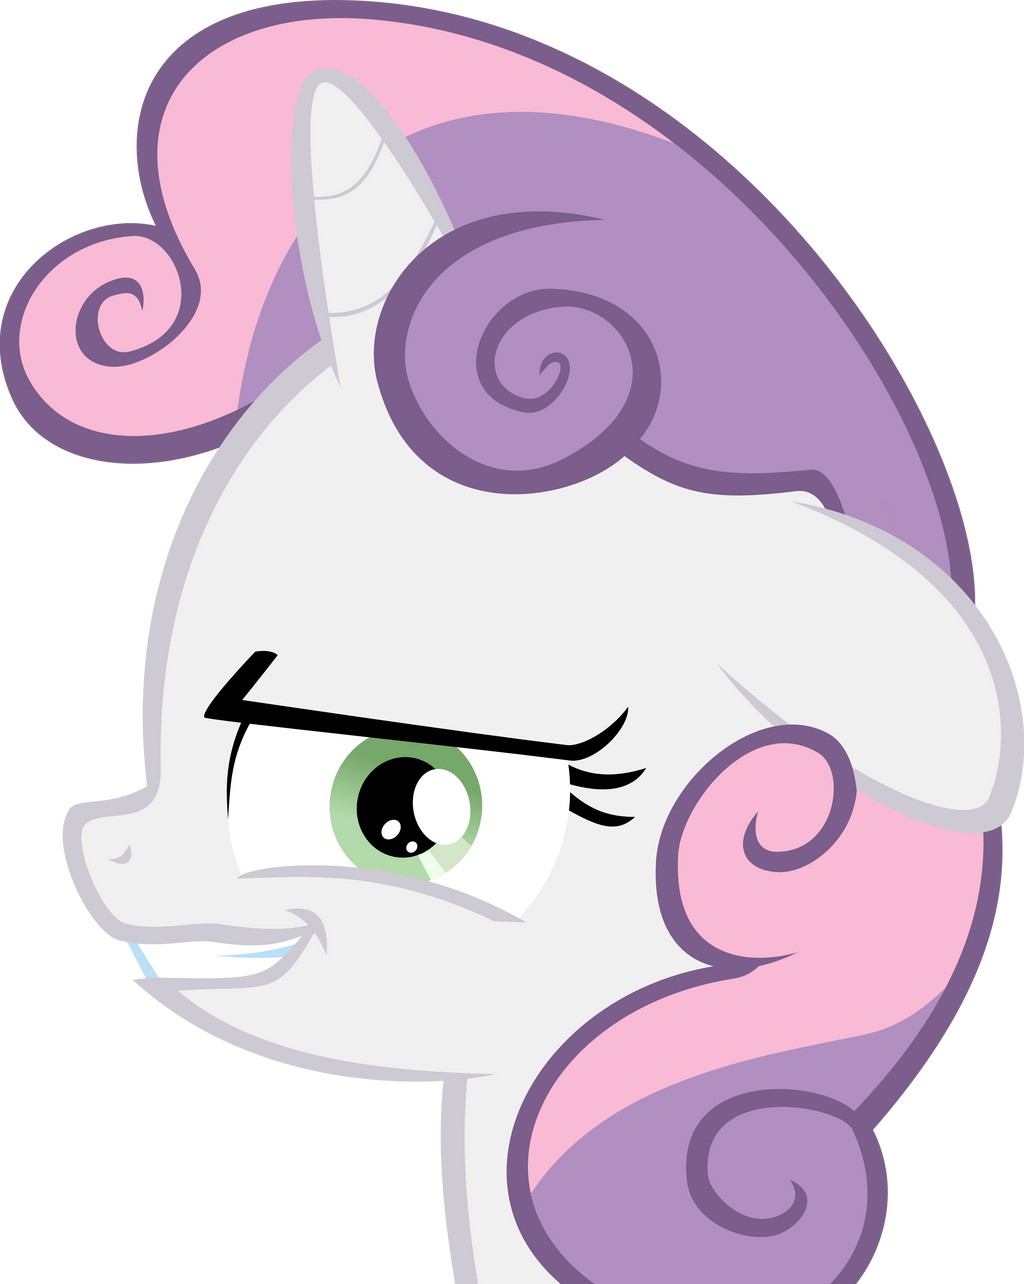 Sweetie Belle stares into your soul